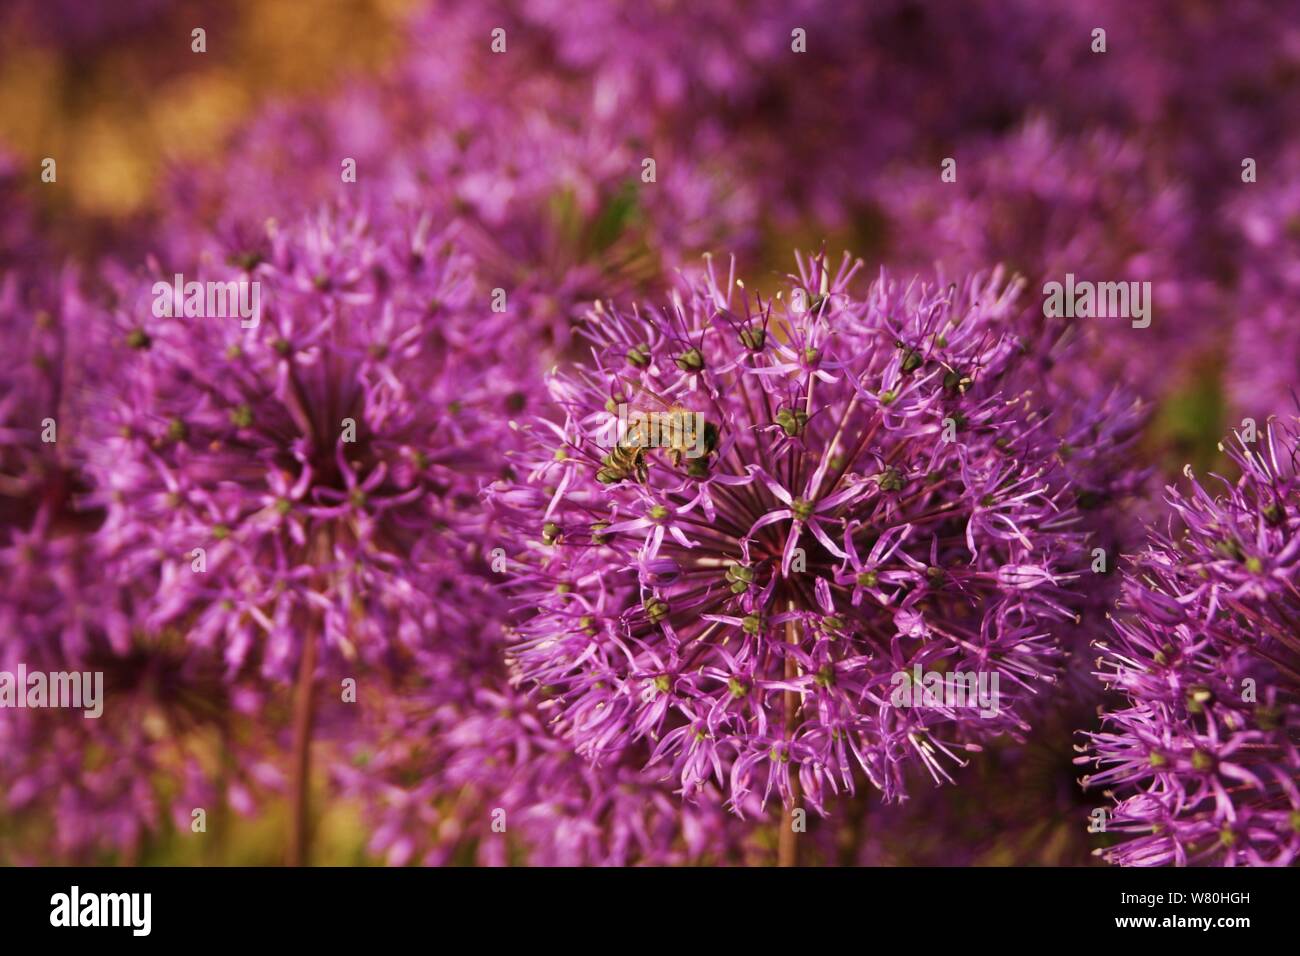 Single bee on a purple allium flower with bokeh background. Stock Photo